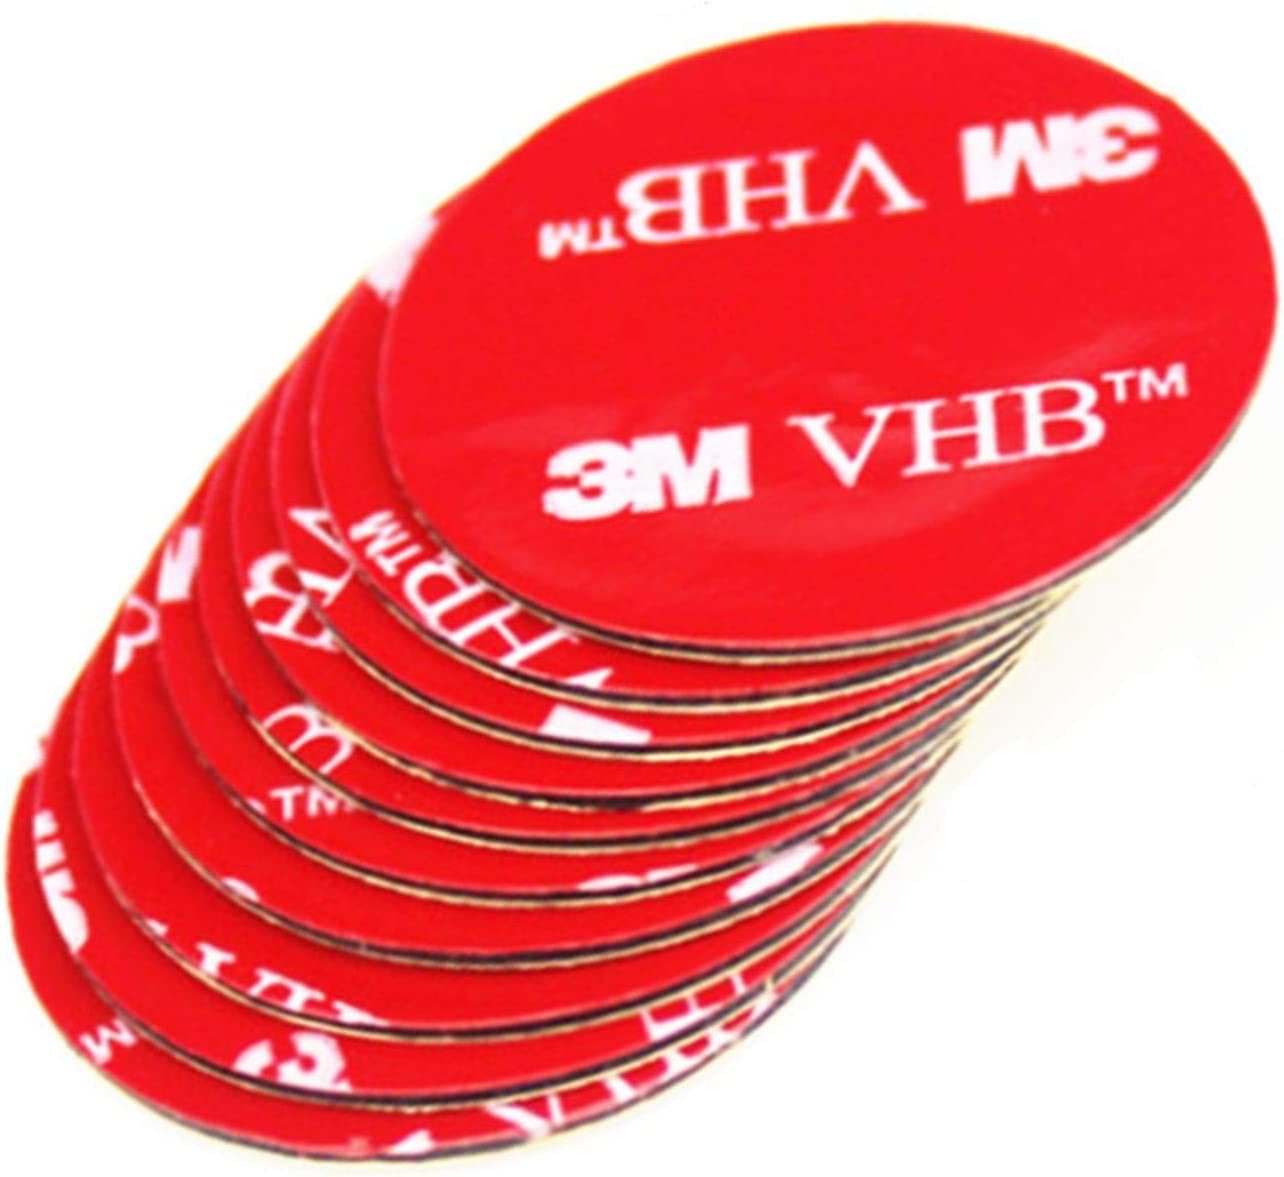 3M Extra Strong Double Sided Tape, Clear Washable Thin Nano Tape